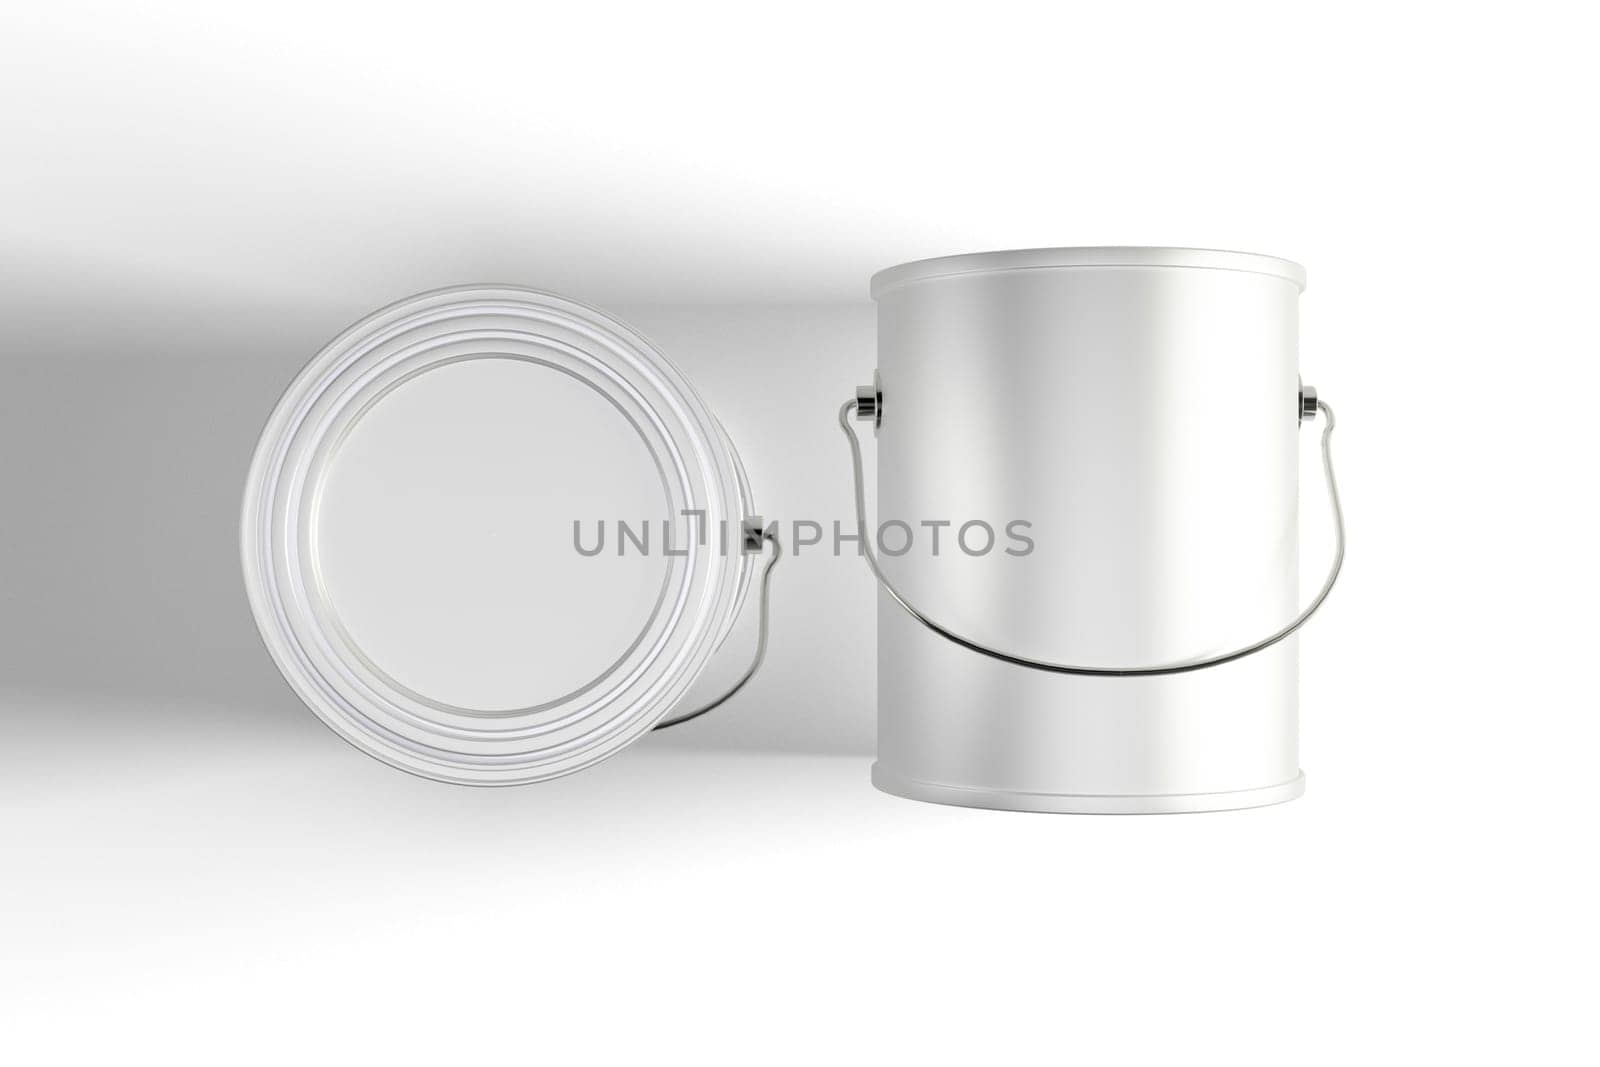 Two gray metal cans with a place for text on a white background